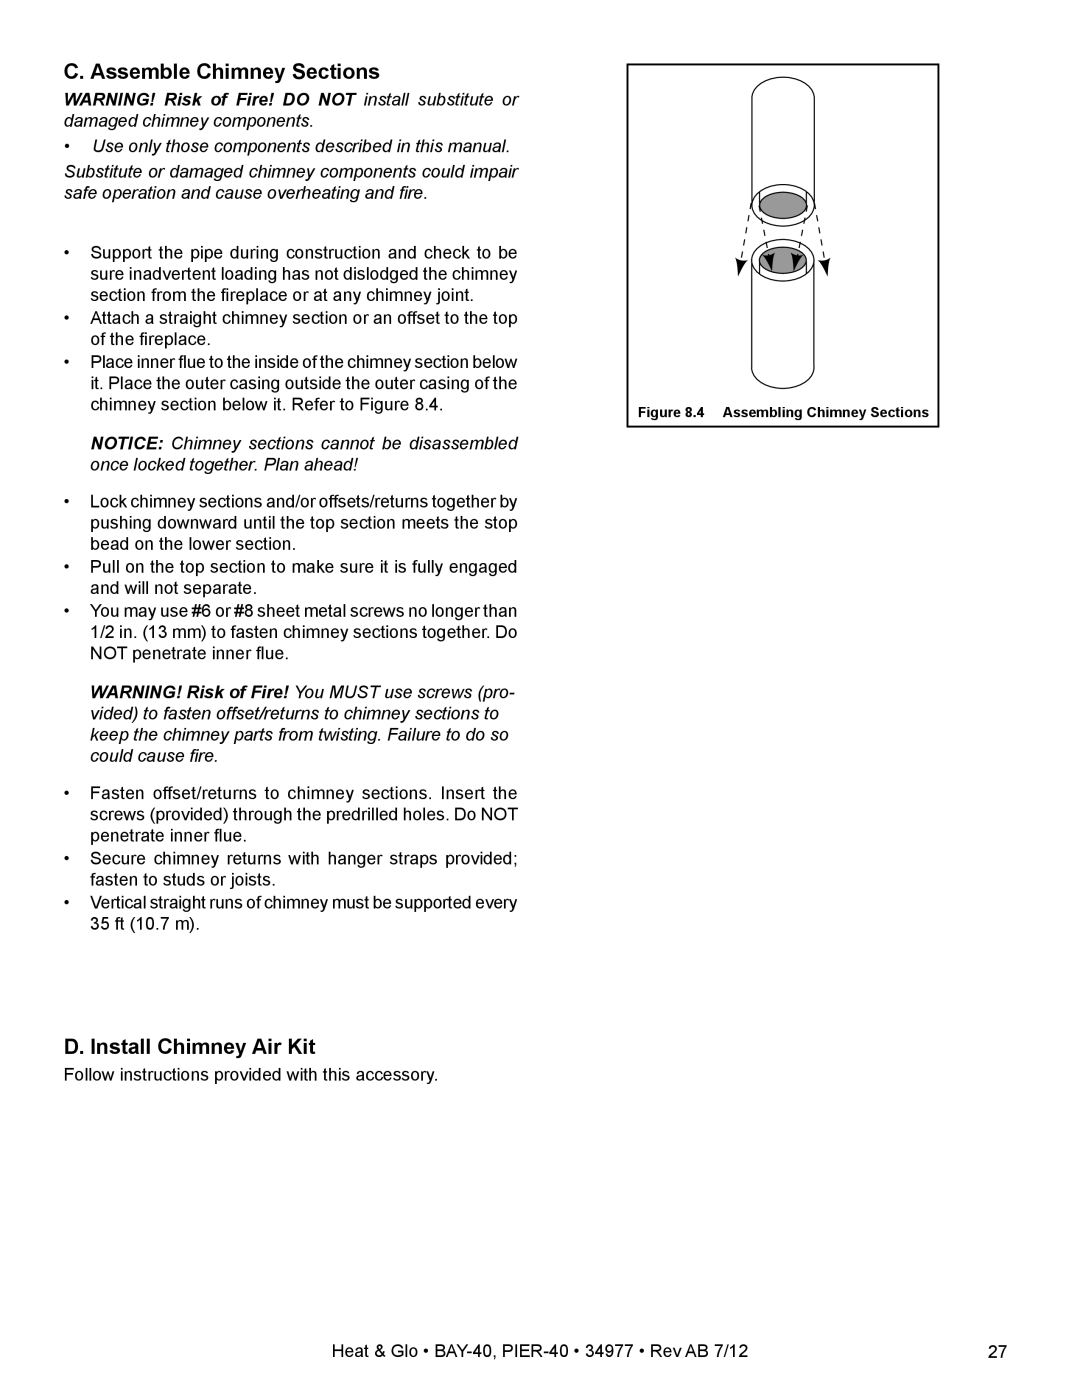 Heat & Glo LifeStyle PIER-40 owner manual C. Assemble Chimney Sections, D. Install Chimney Air Kit 